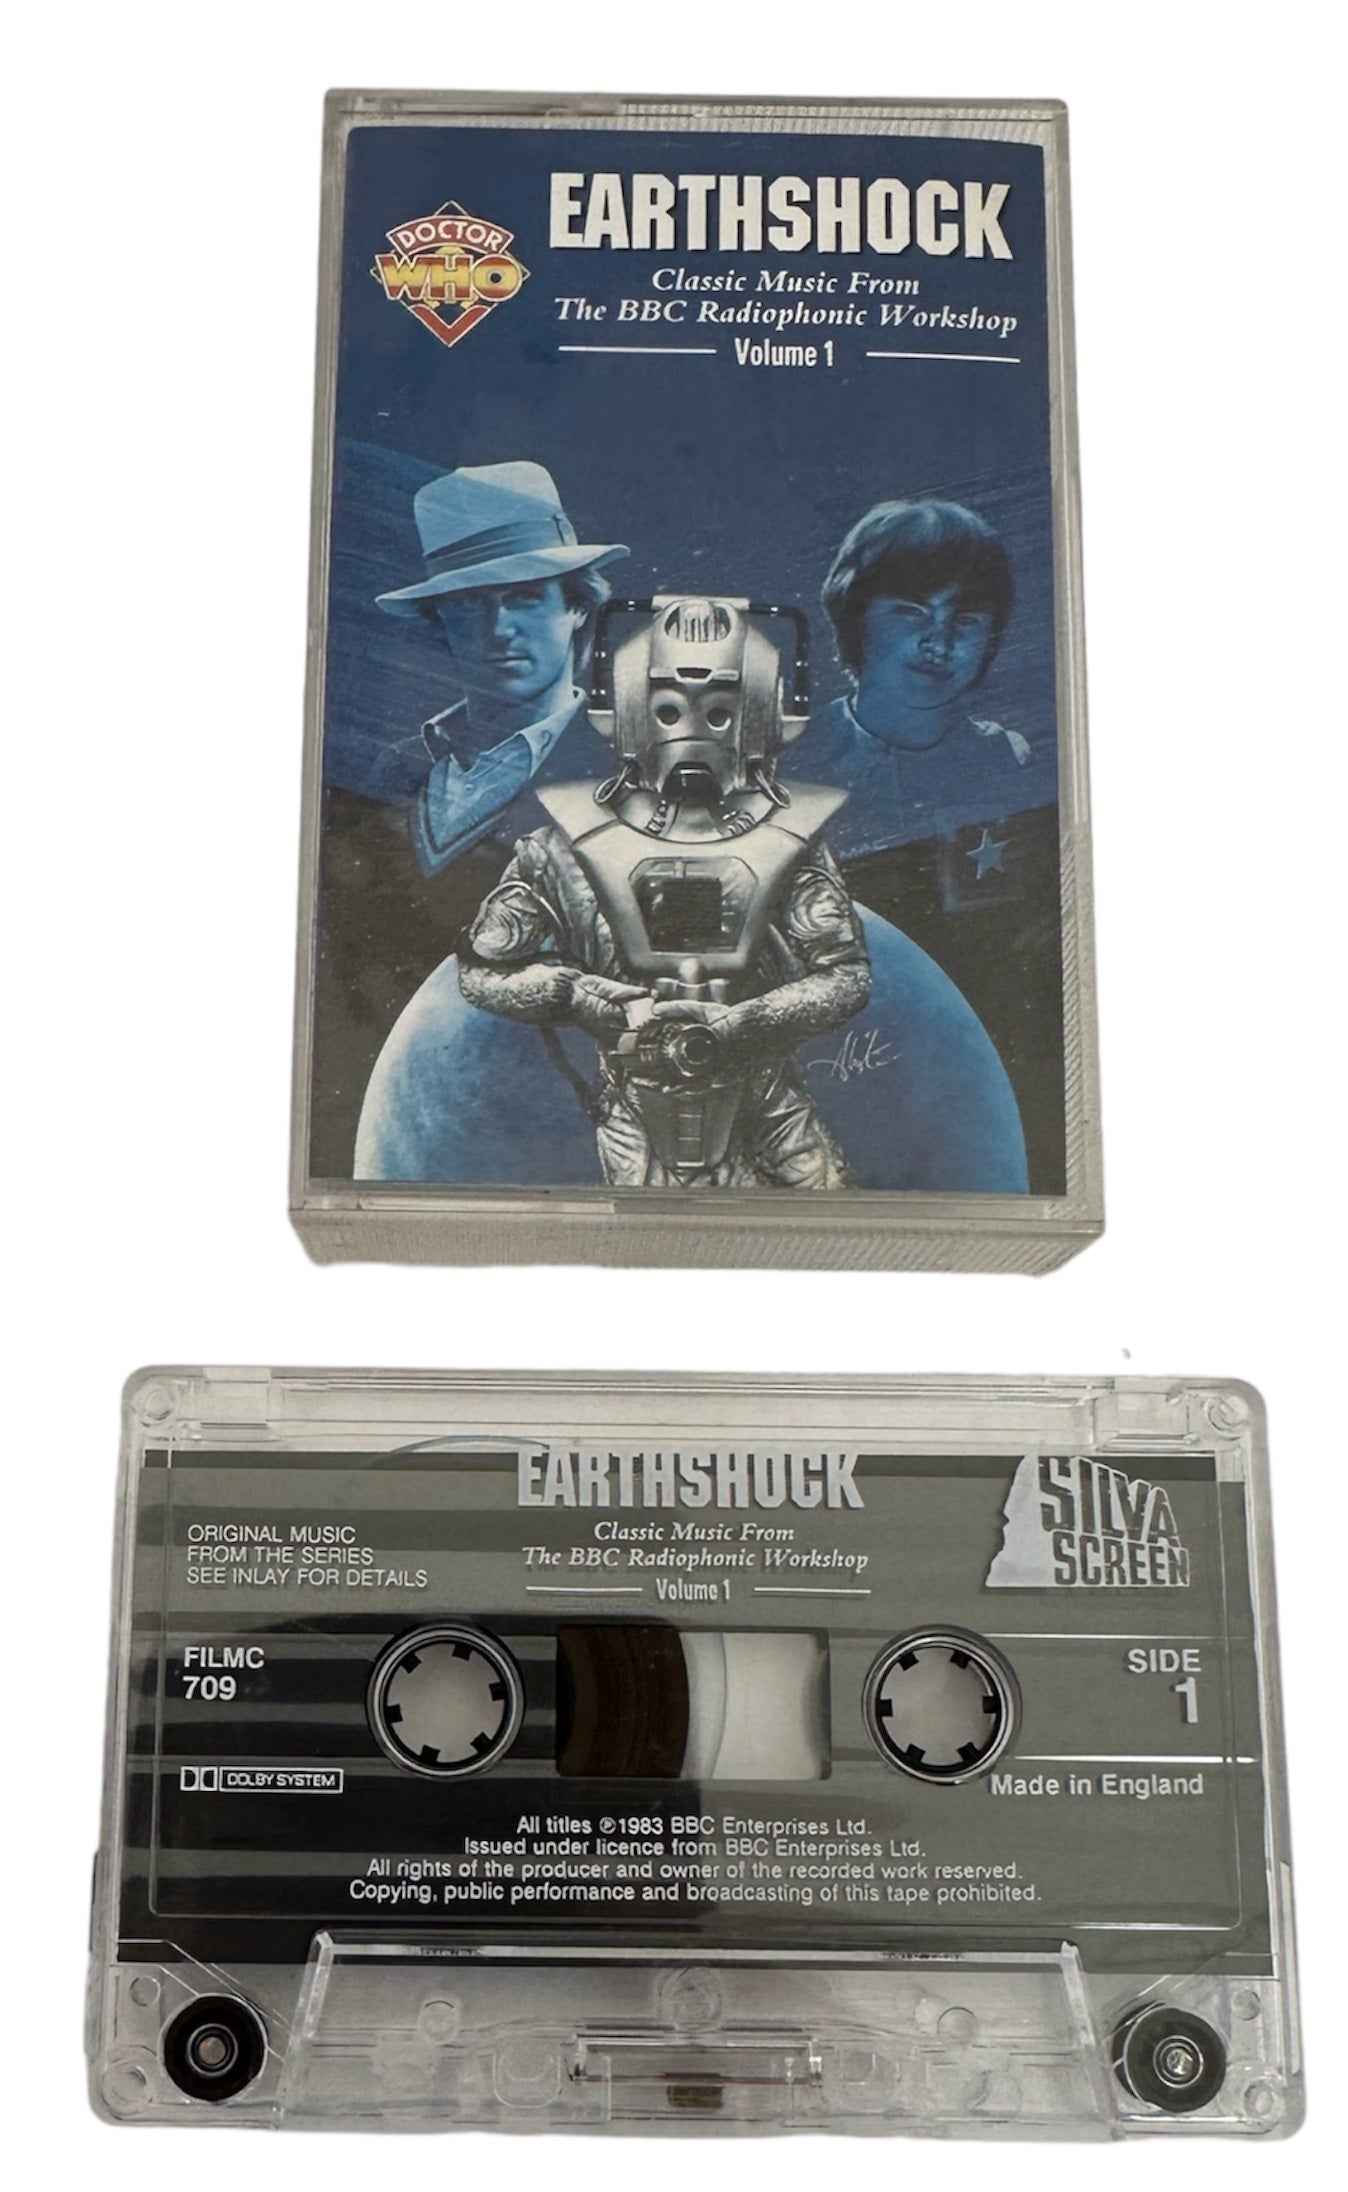 Vintage Silva Screen 1992 Doctor Dr Who Earthshock - Classic Music From The BBCs Radiophonic Workshop Volume 1 Audio Cassette - Shop Stock Room Find.